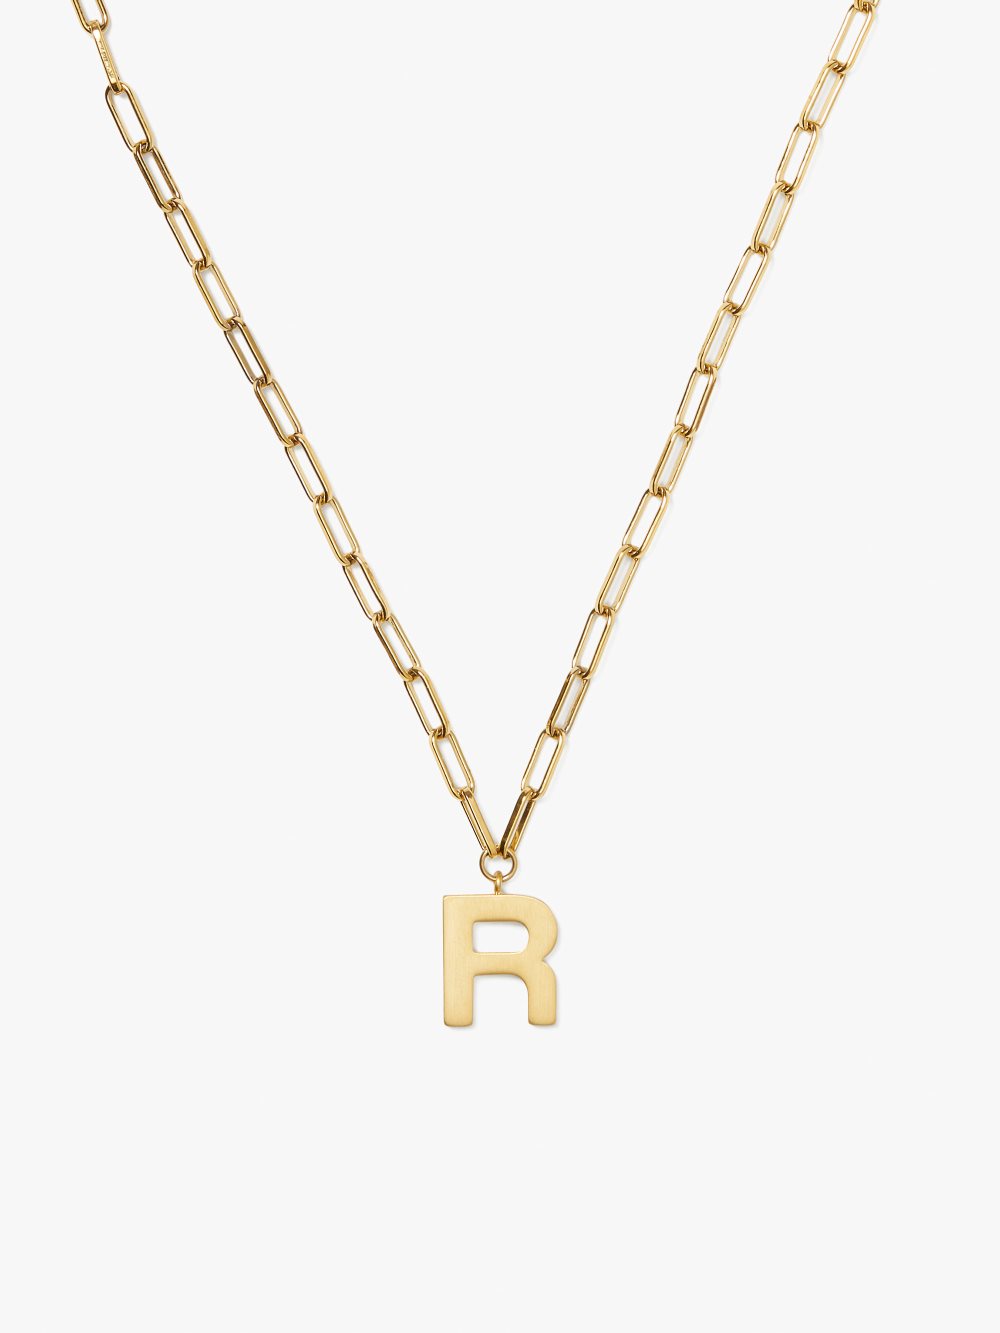 Women's gold. r initial this pendant | Kate Spade